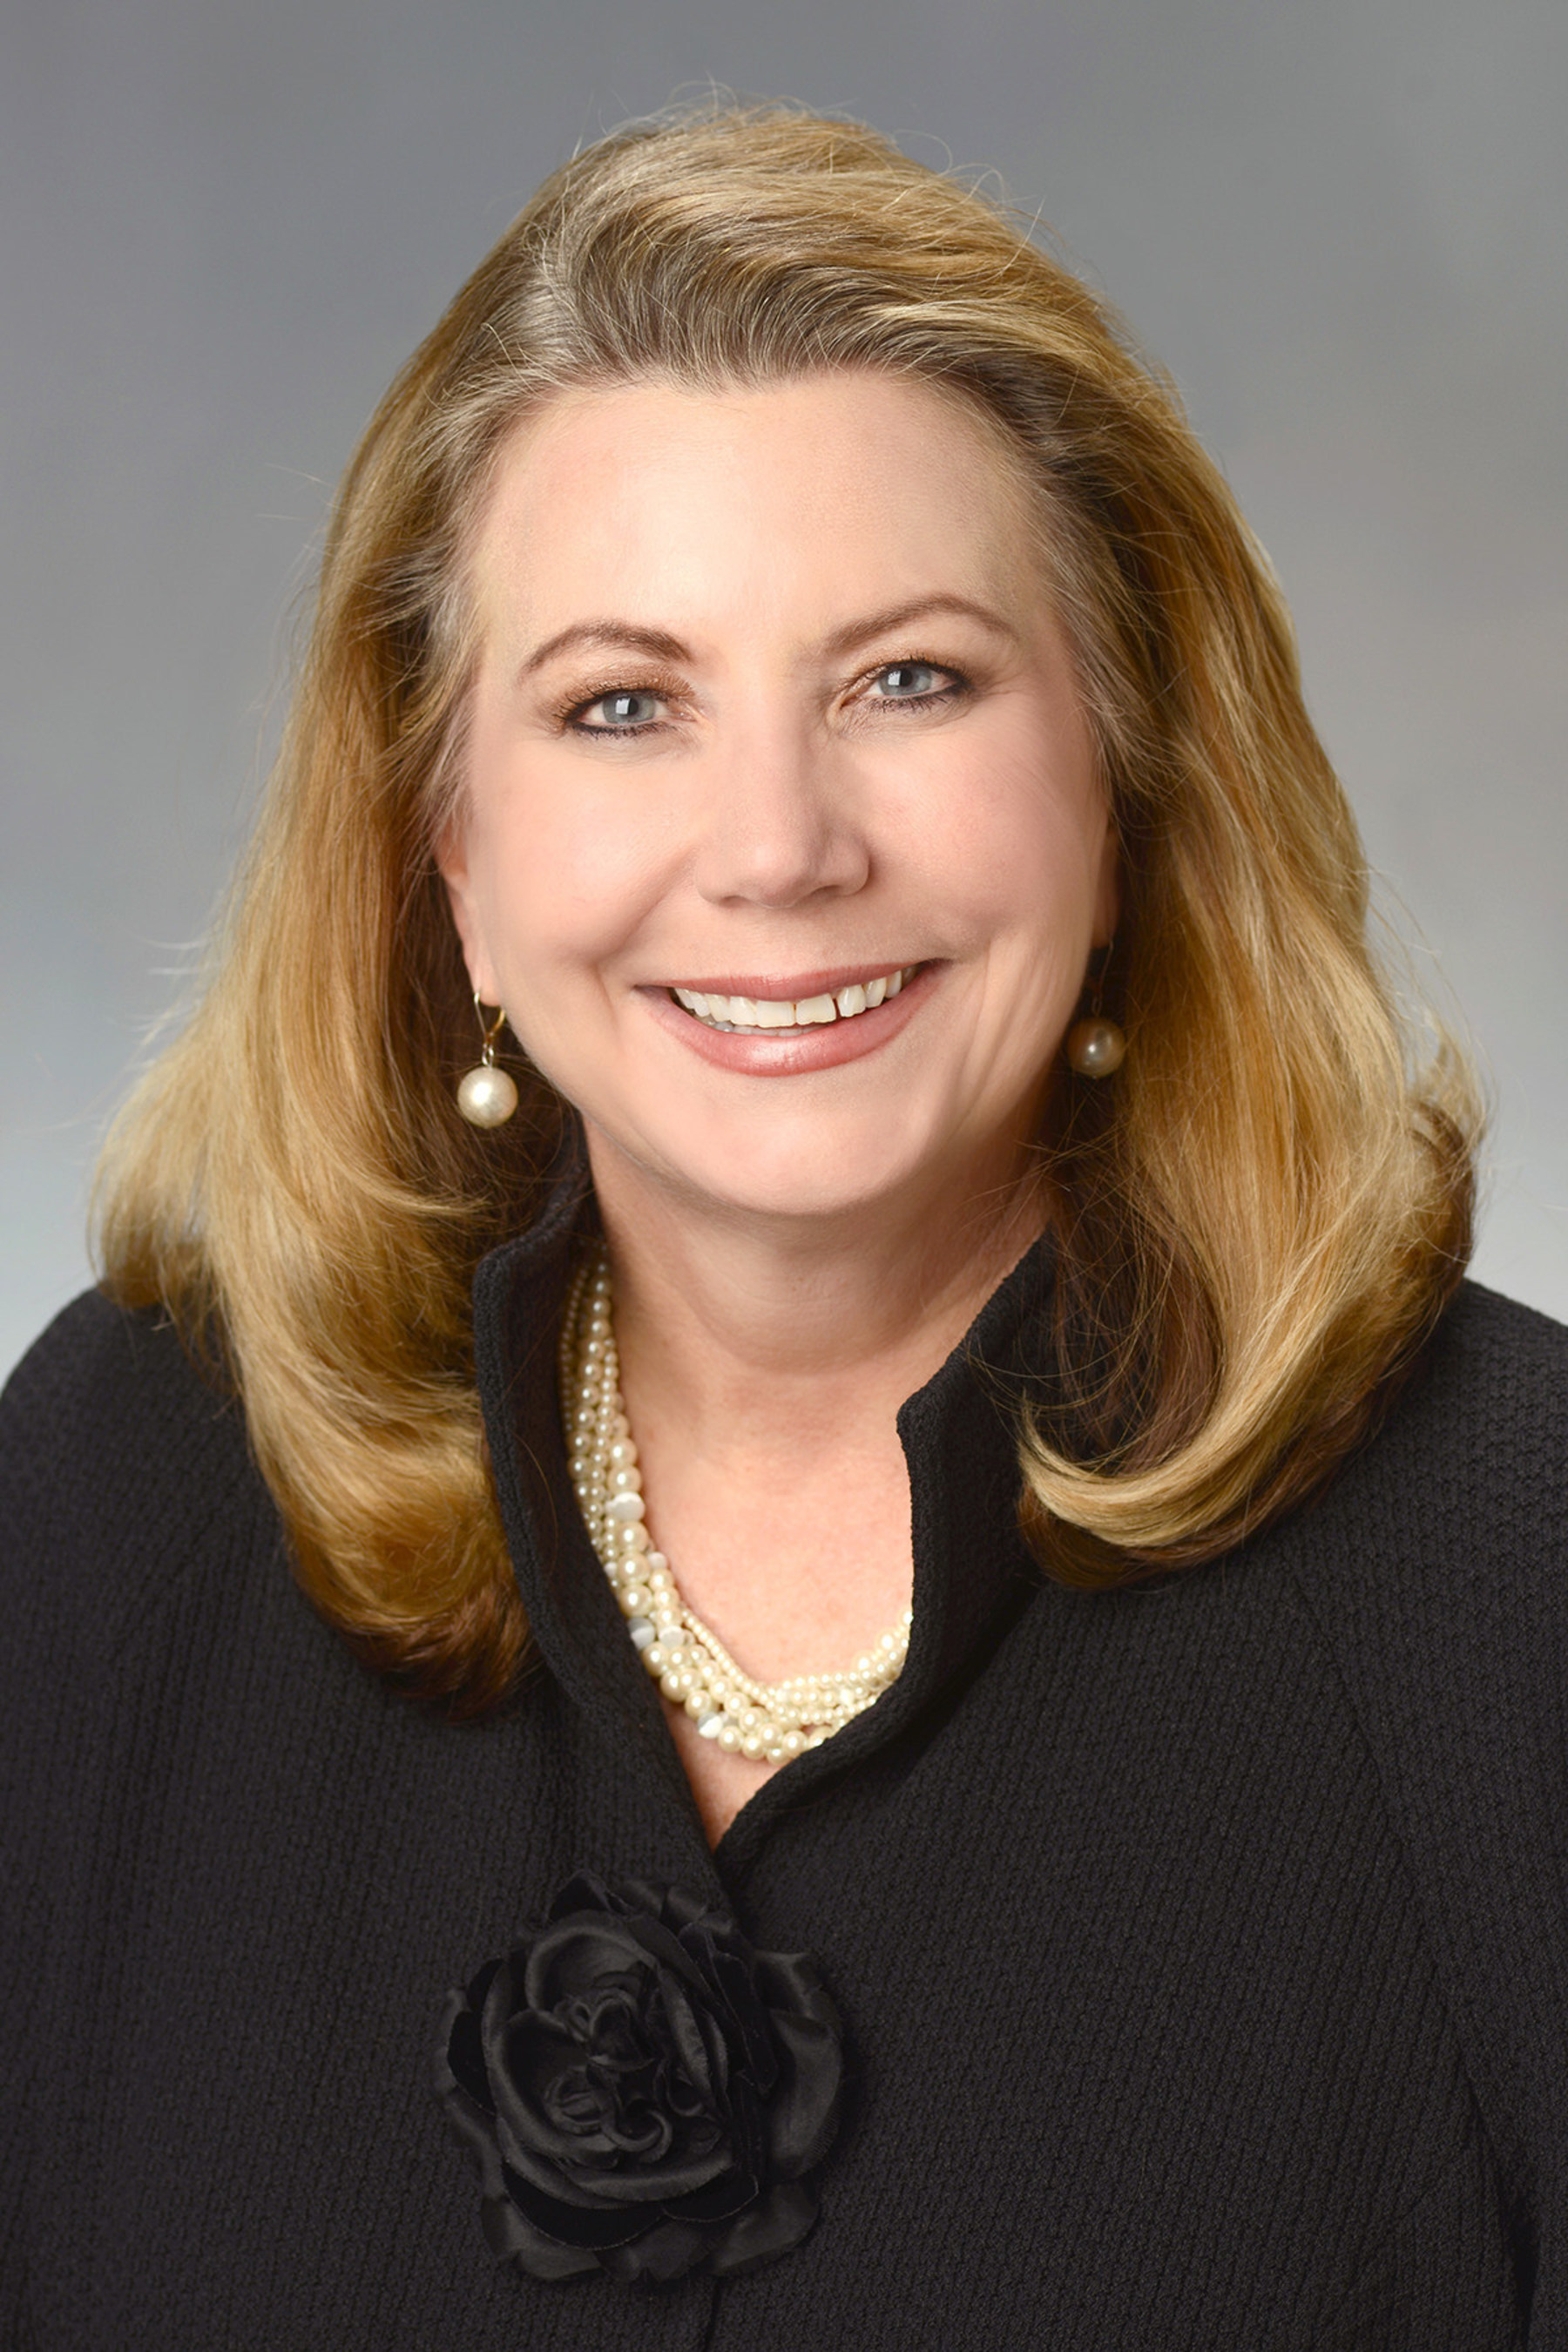 Tami Barron has been re-elected to the boards of directors of two wireless industry organizations: CTIA-The Wireless Association(R), and the Competitive Carriers Association (CCA).Part of Southern Company for more than 33 years, Barron was named president and CEO of SouthernLINC Wireless in April 2015. She concurrently serves as CEO for Southern Telecom, a wholly-owned dark fiber subsidiary of SouthernLINC Wireless.